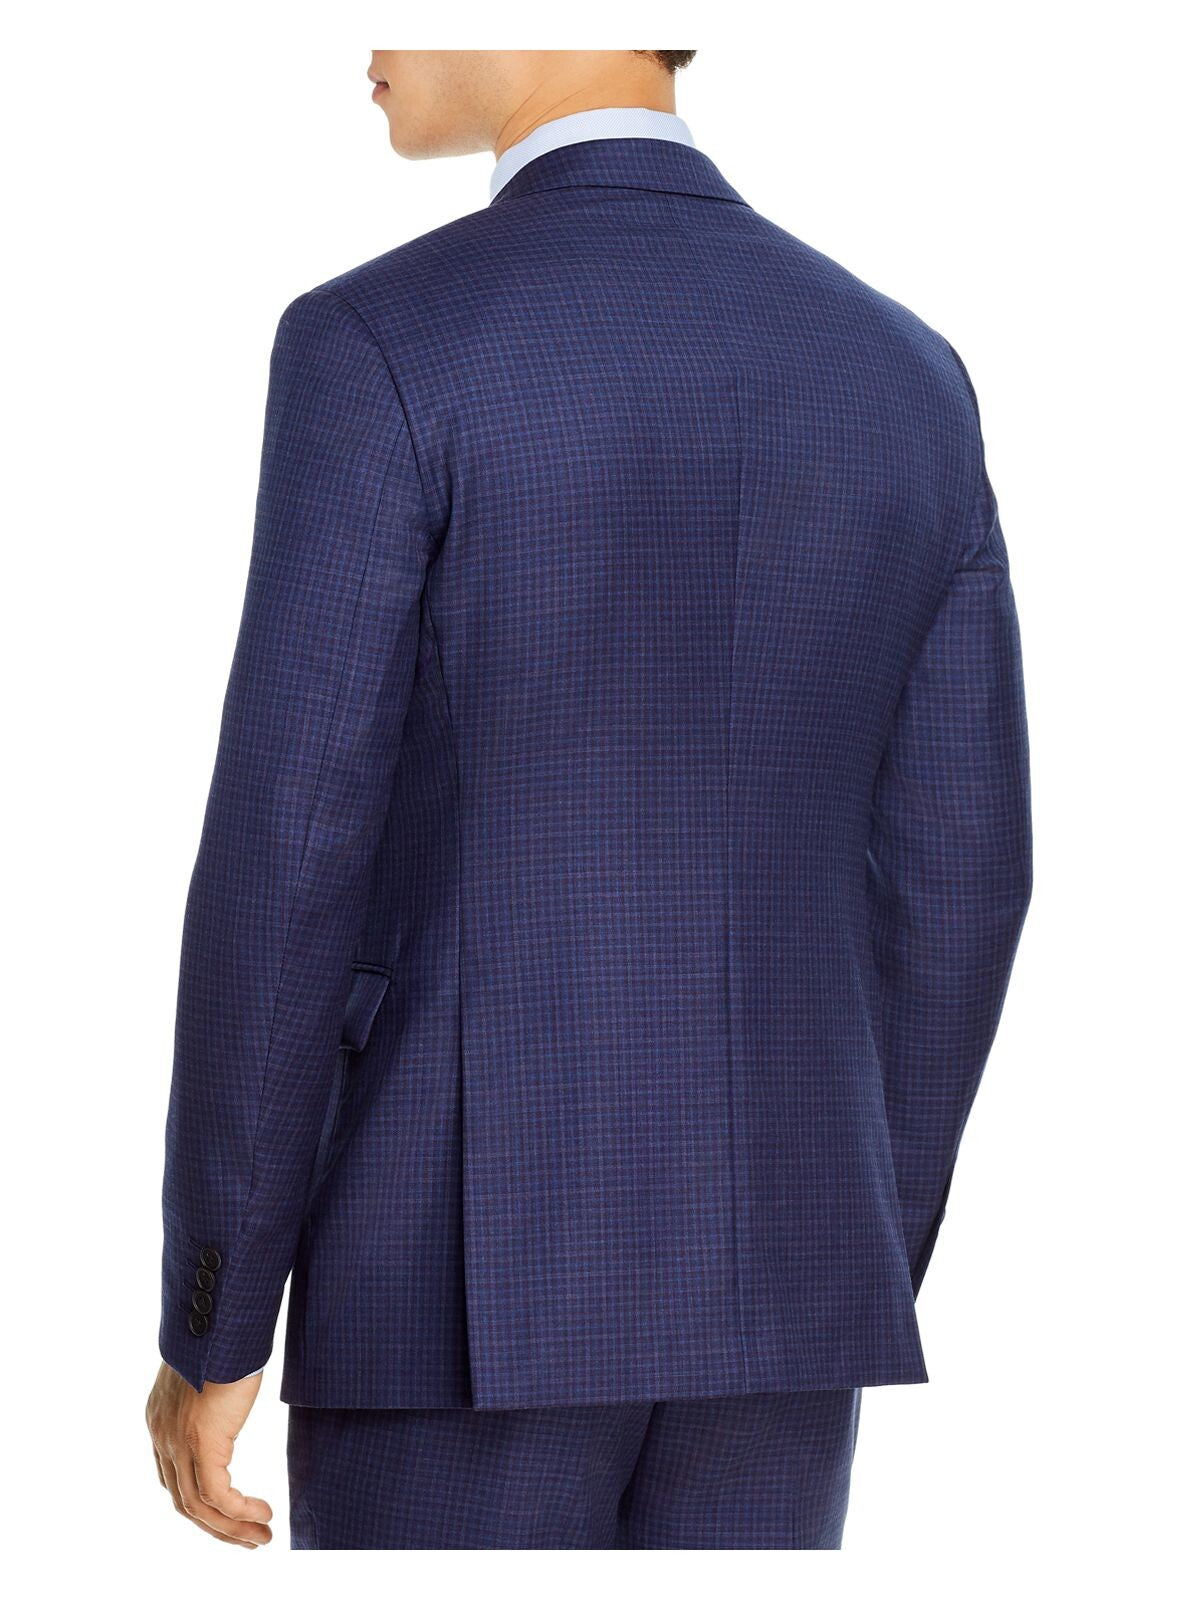 THEORY Mens Bowery Blue Single Breasted, Extra Slim Fit Wool Blend Suit Separate Blazer Jacket 38S